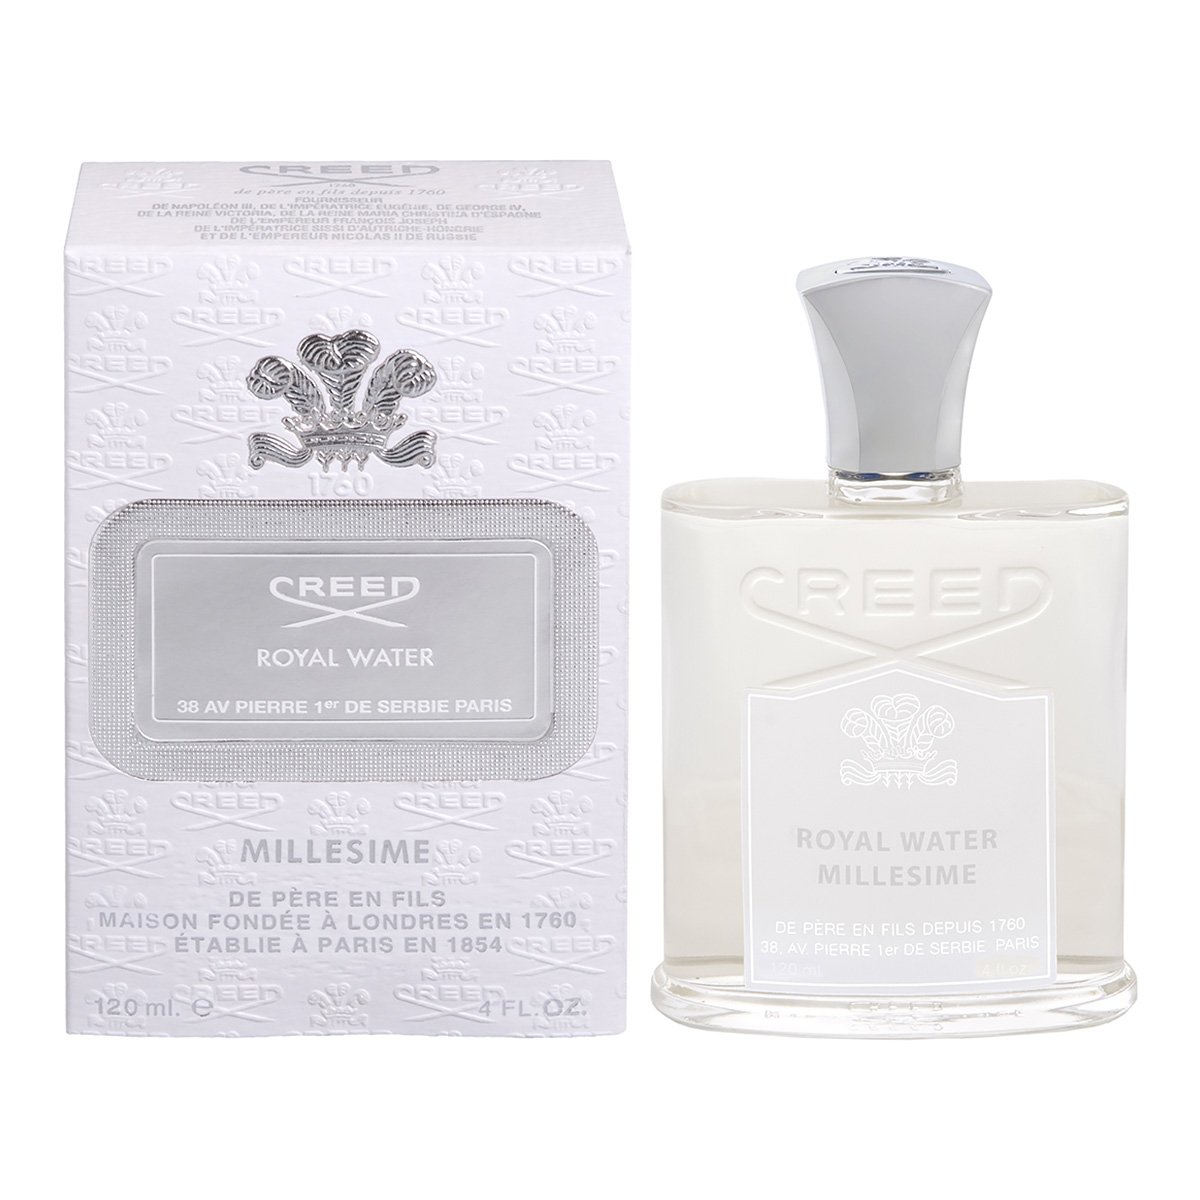 Духи крид отзывы. Парфюмерная вода Creed Royal Water. Royal Water Creed 75 мл. Creed Millesime Royal Water 75ml. Creed Silver Mountain.